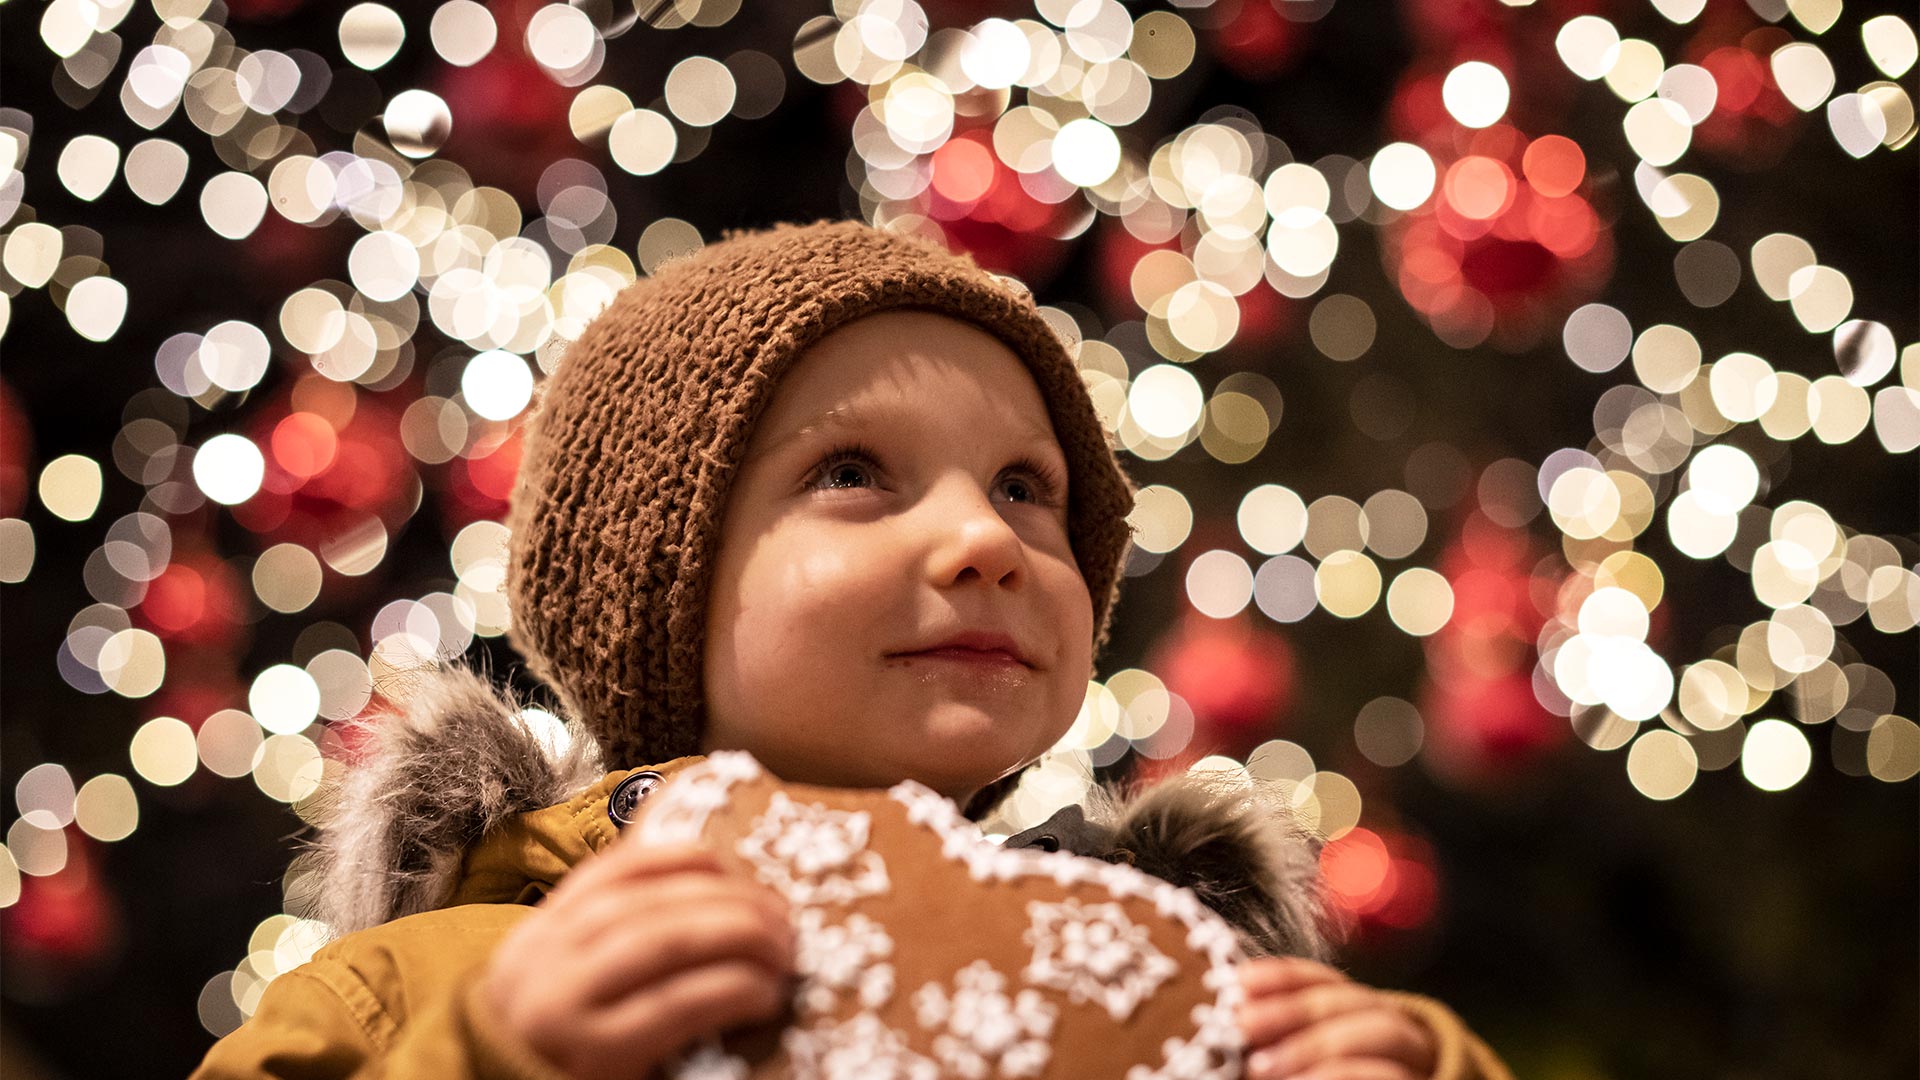 Against a backdrop of lights, in the foreground a child eats a sweet in a Christmas atmosphere.